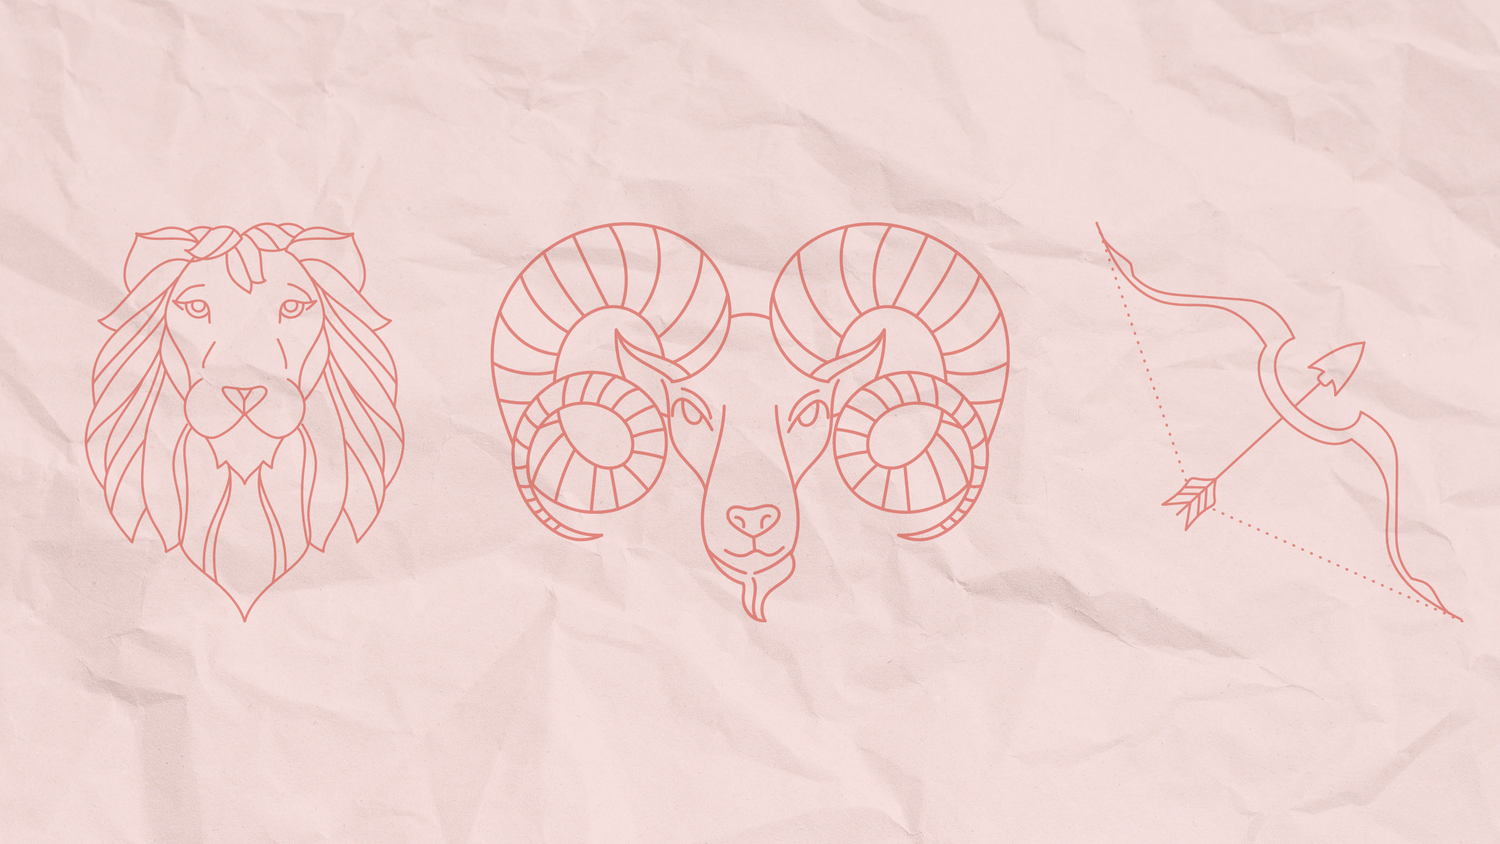 Wrinkled pink paper with red outlines of zodiac signs Leo, Aries, and Sagittarius